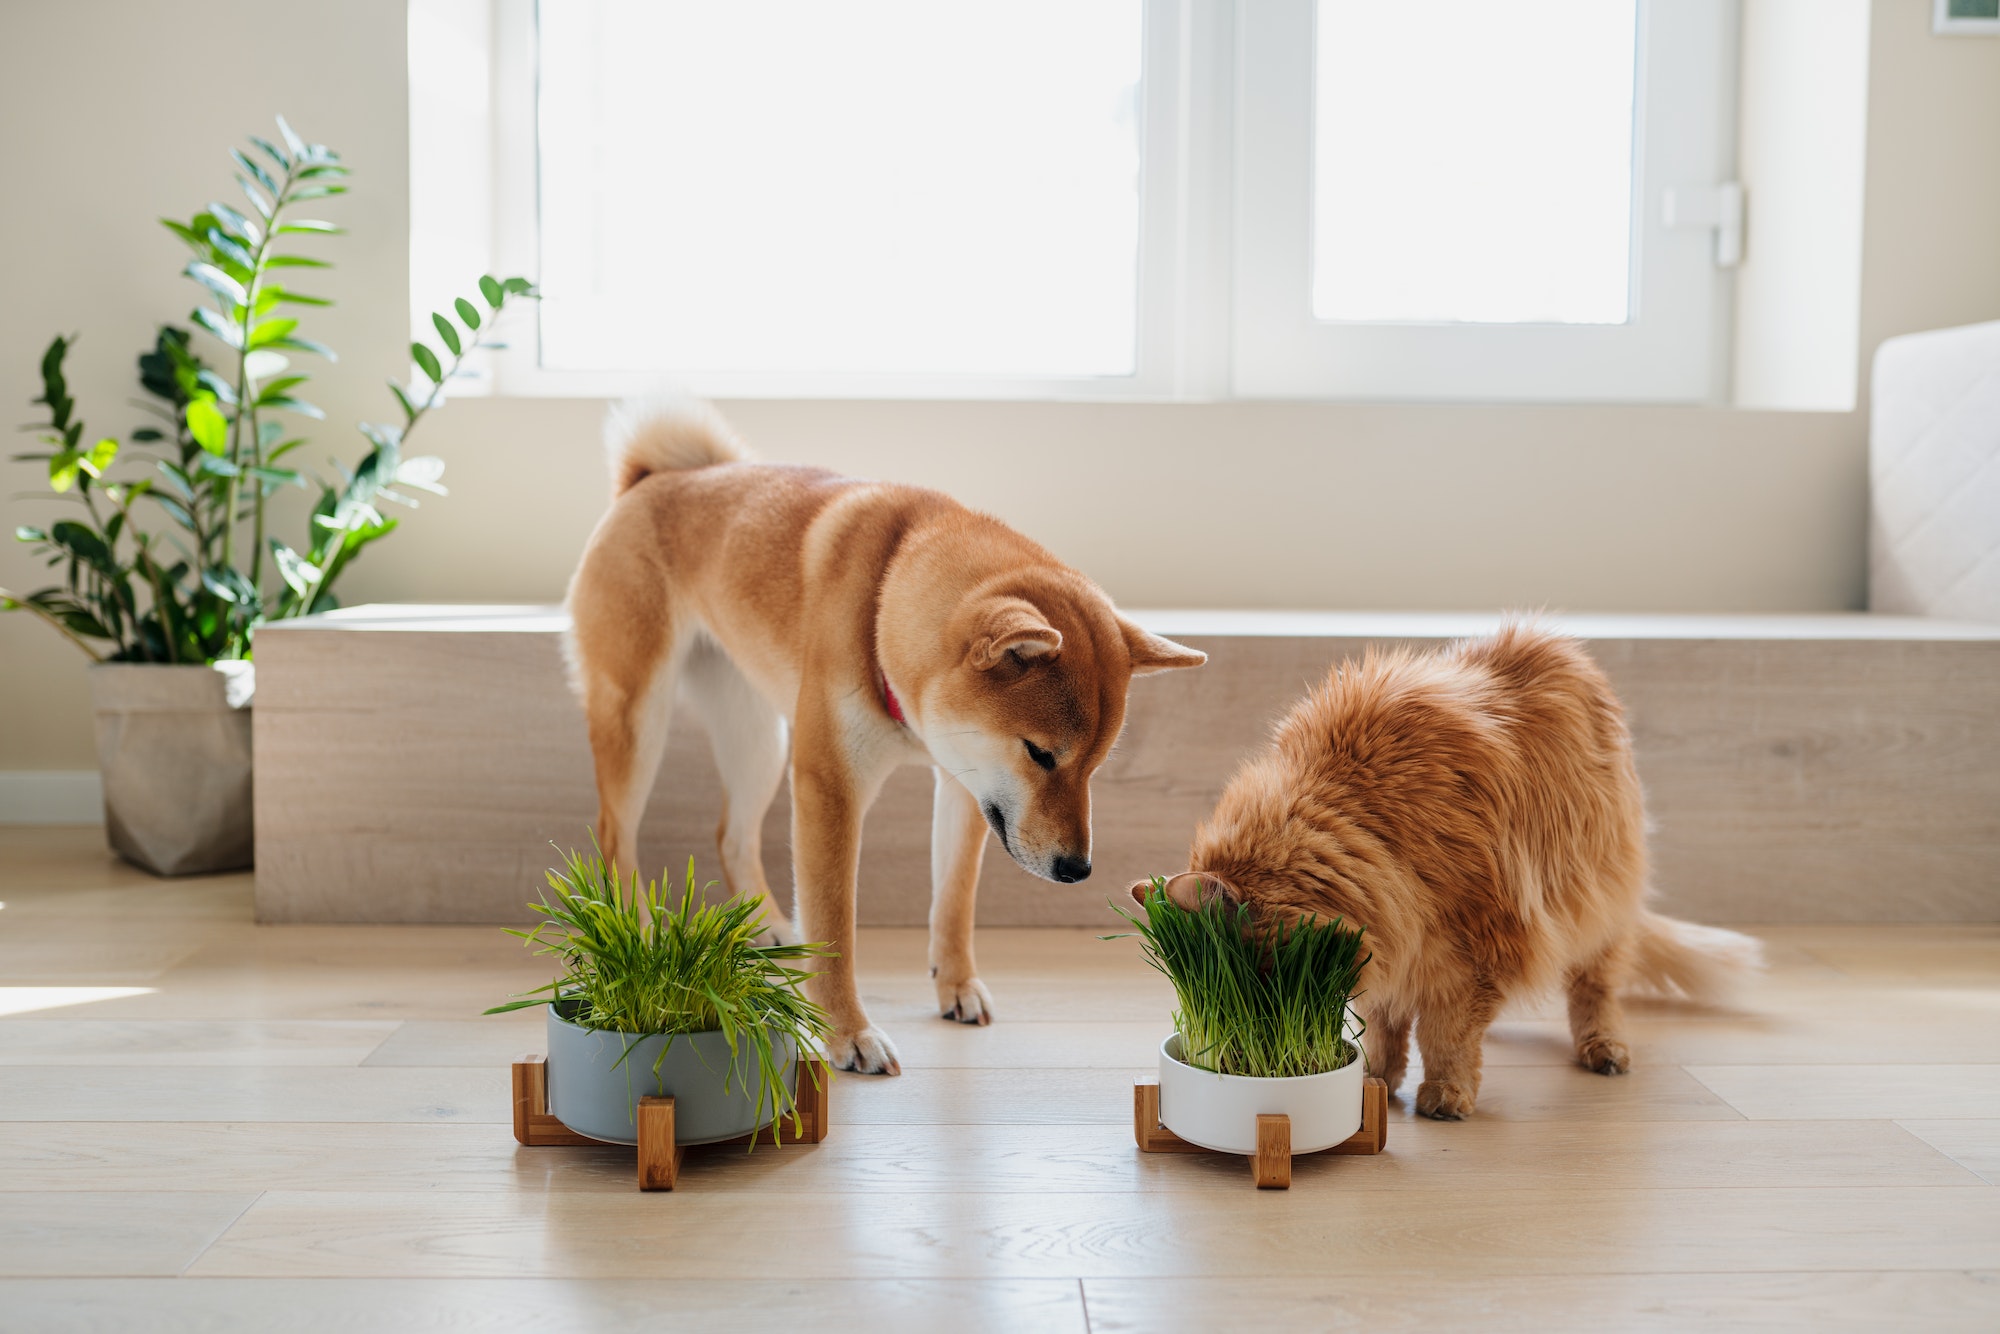 Pet Grass or Wheatgrass for dogs and cats. Wheatgrass is the fresh sprouted leaves of wheat plant